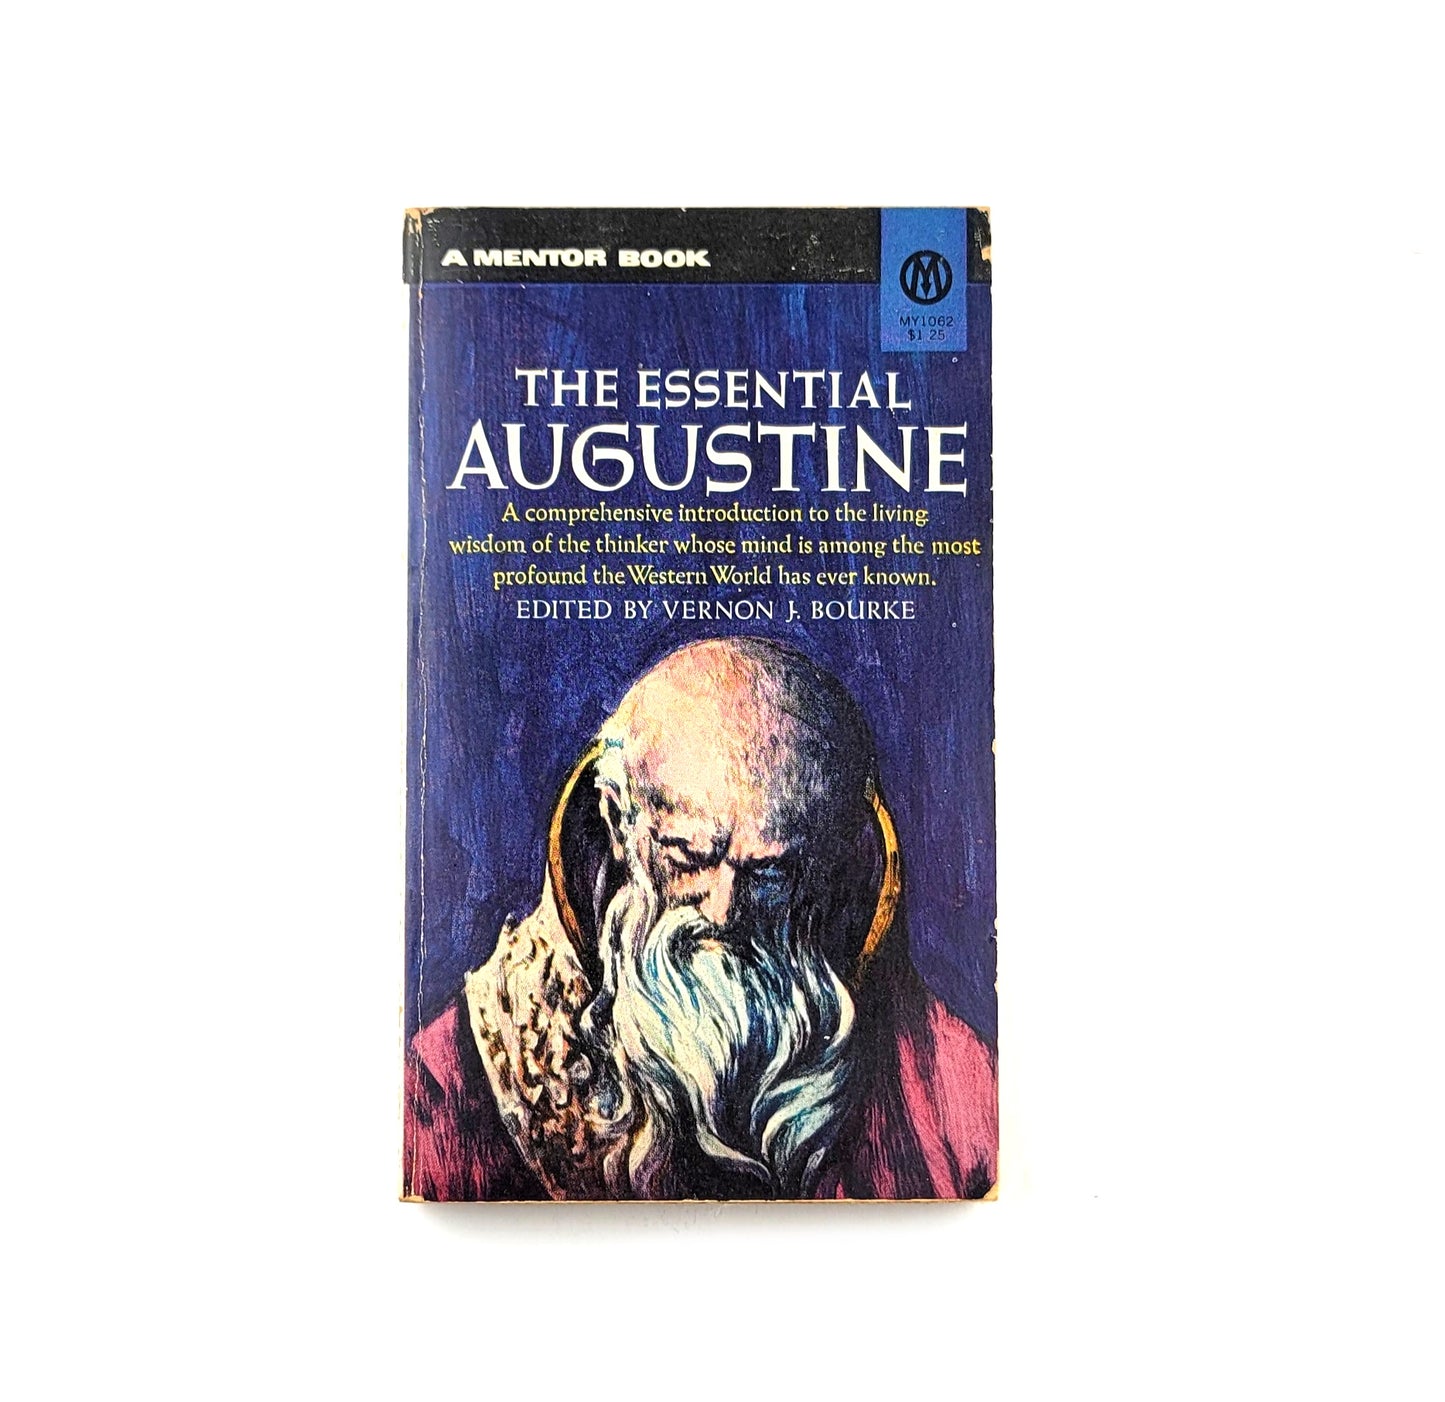 The Essential Augustine by Saint Augustine of Hippo (Author), Vernon J. Bourke (Editor)